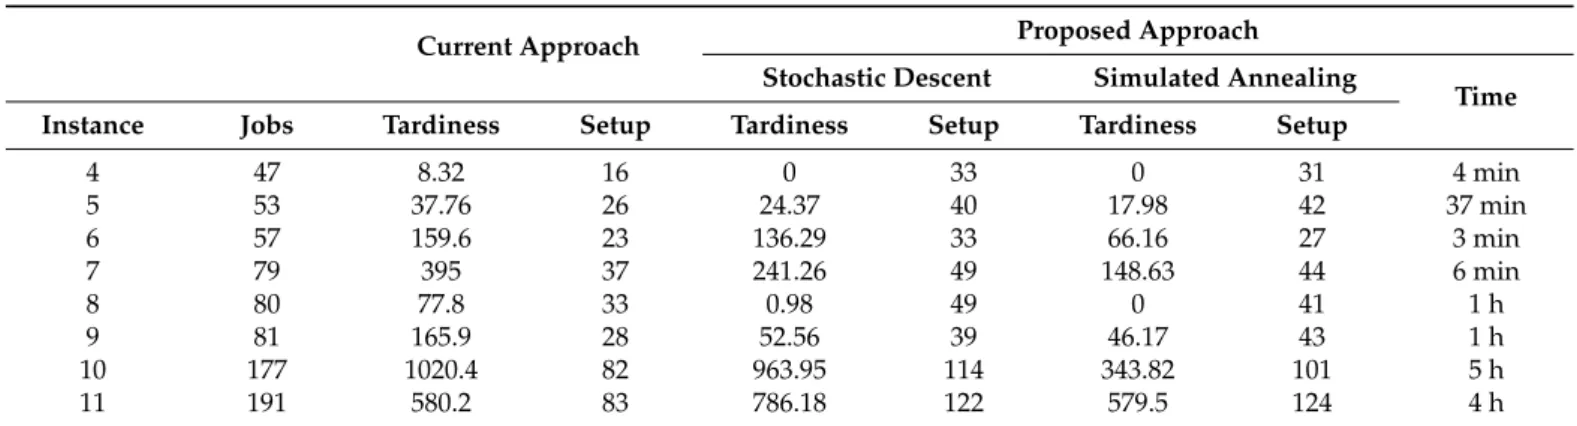 Table 4. Comparison of results between the benchmark method and the proposed approach.